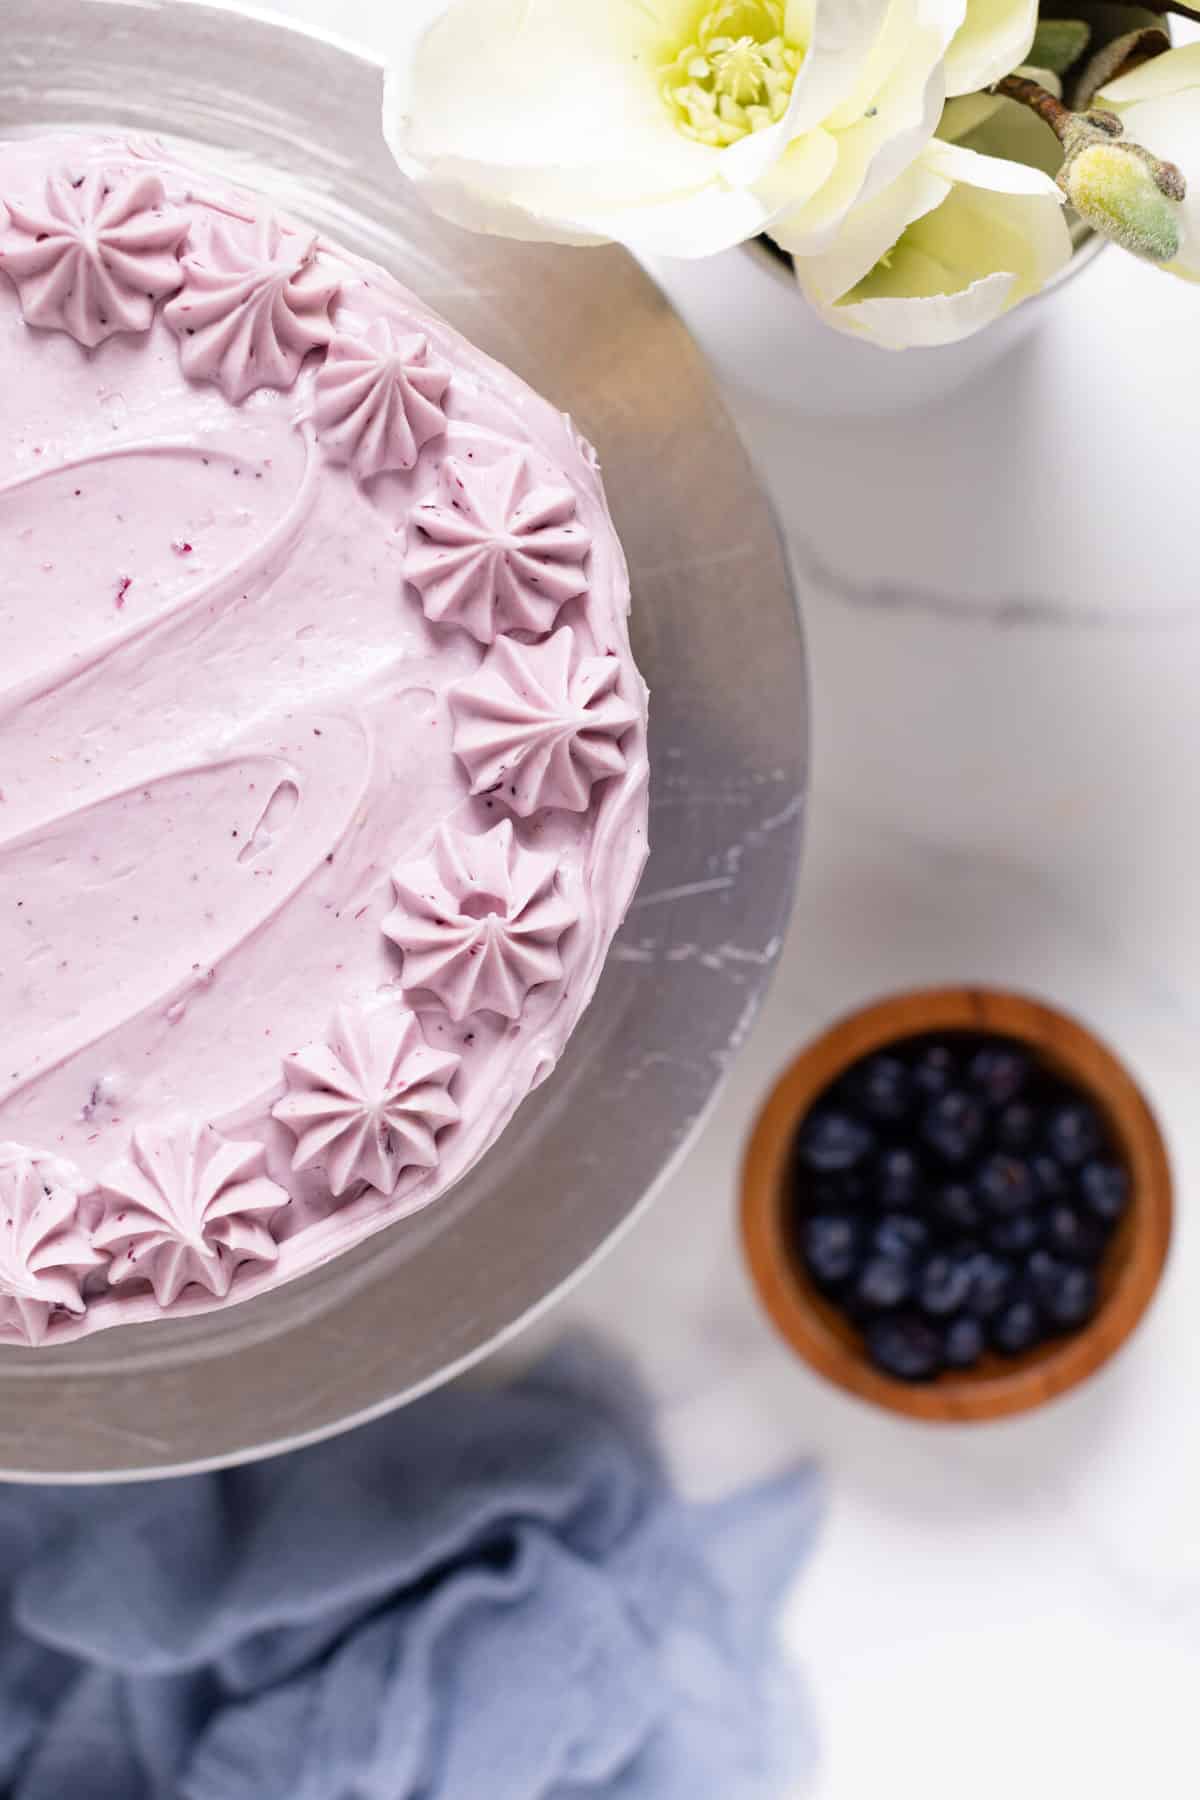 Blueberry Oatmeal Cake + Cream Cheese Frosting